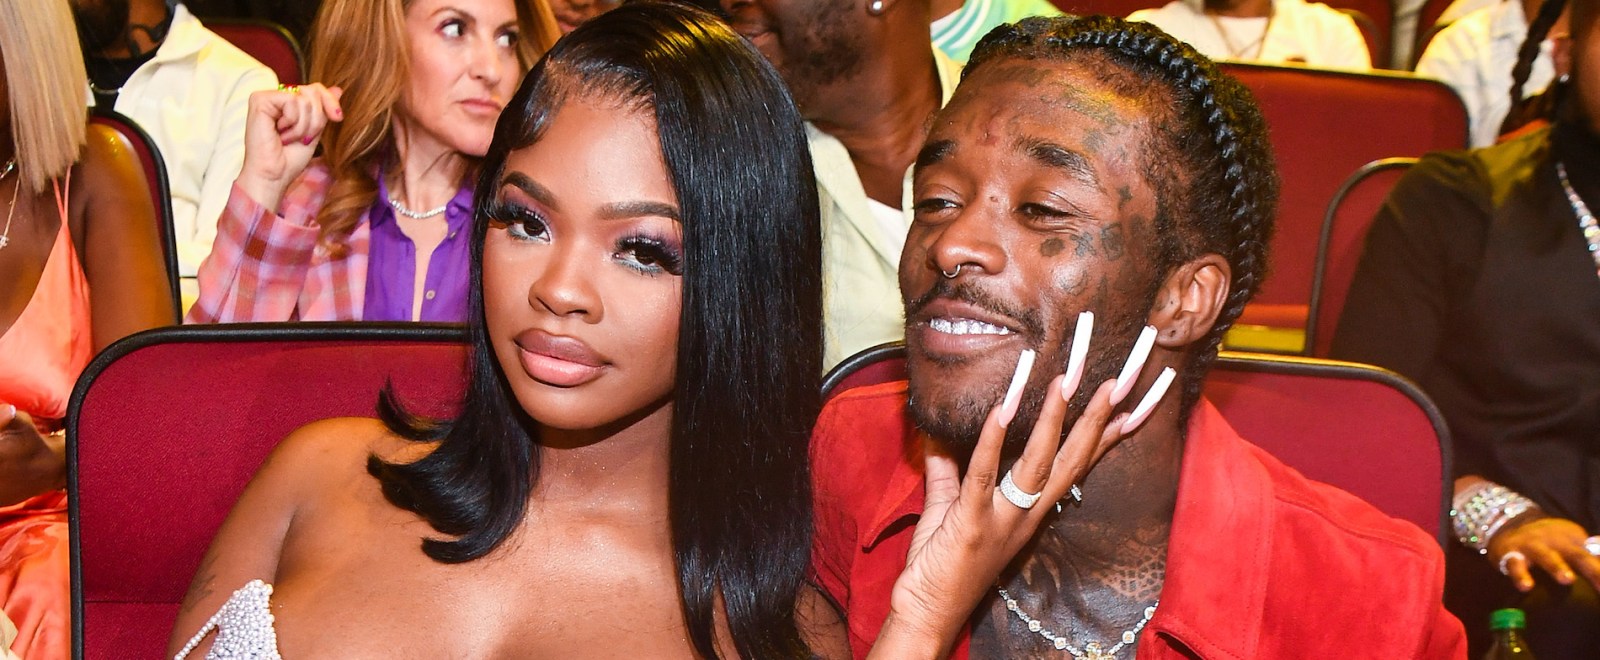 JT Threw Her Phone At Lil Uzi Vert As The Two Got Into An Explosive